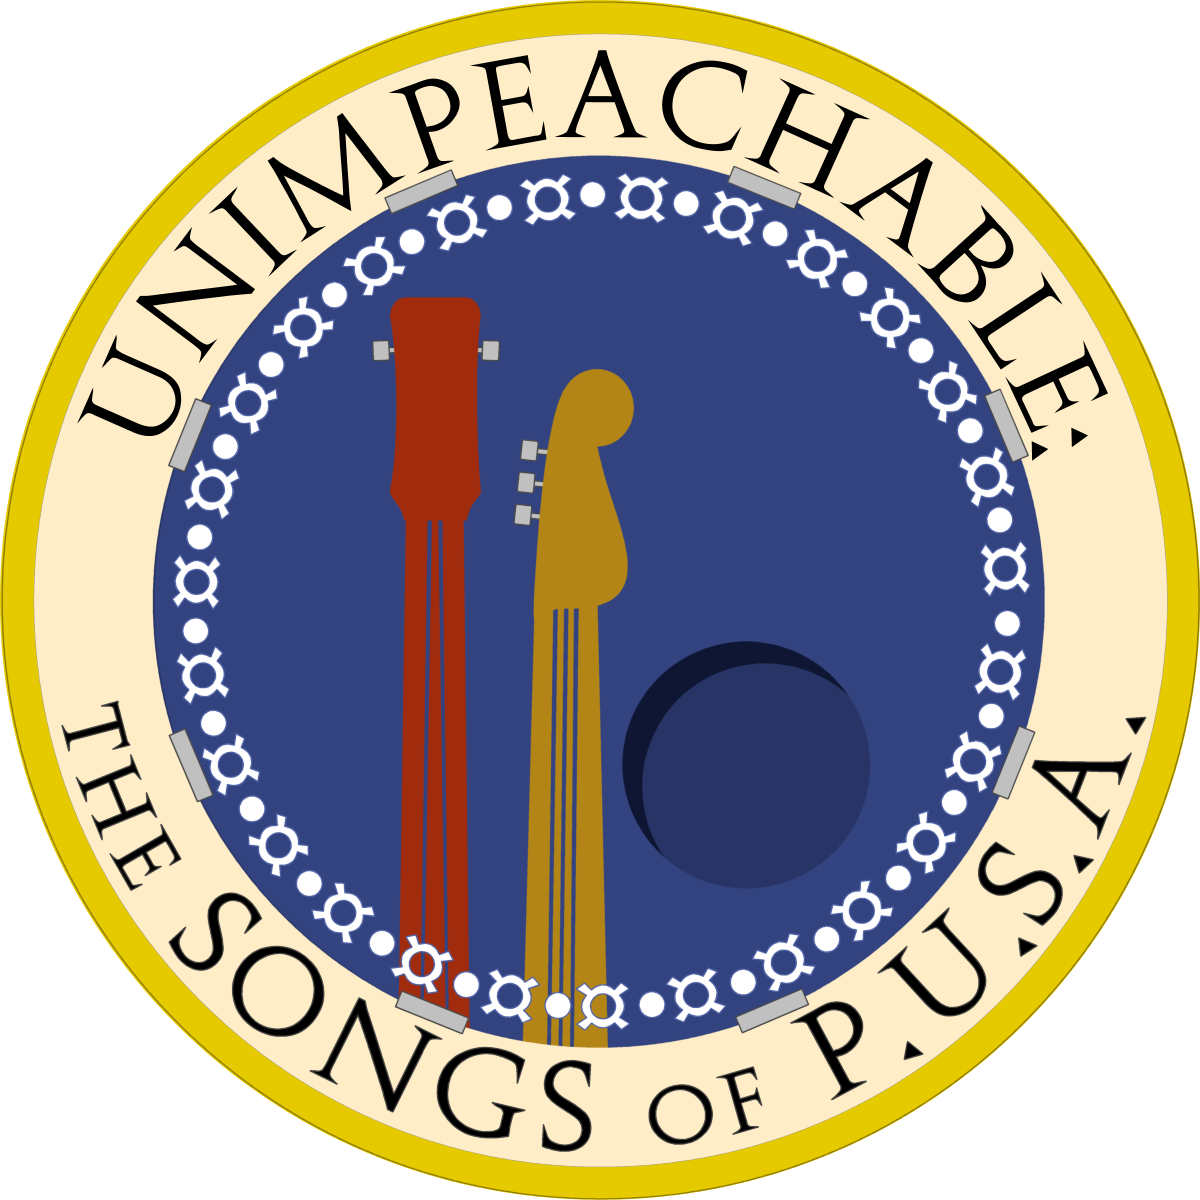 Unimpeachable: The Songs of the Presidents of the United States of America – Episode 3 – II